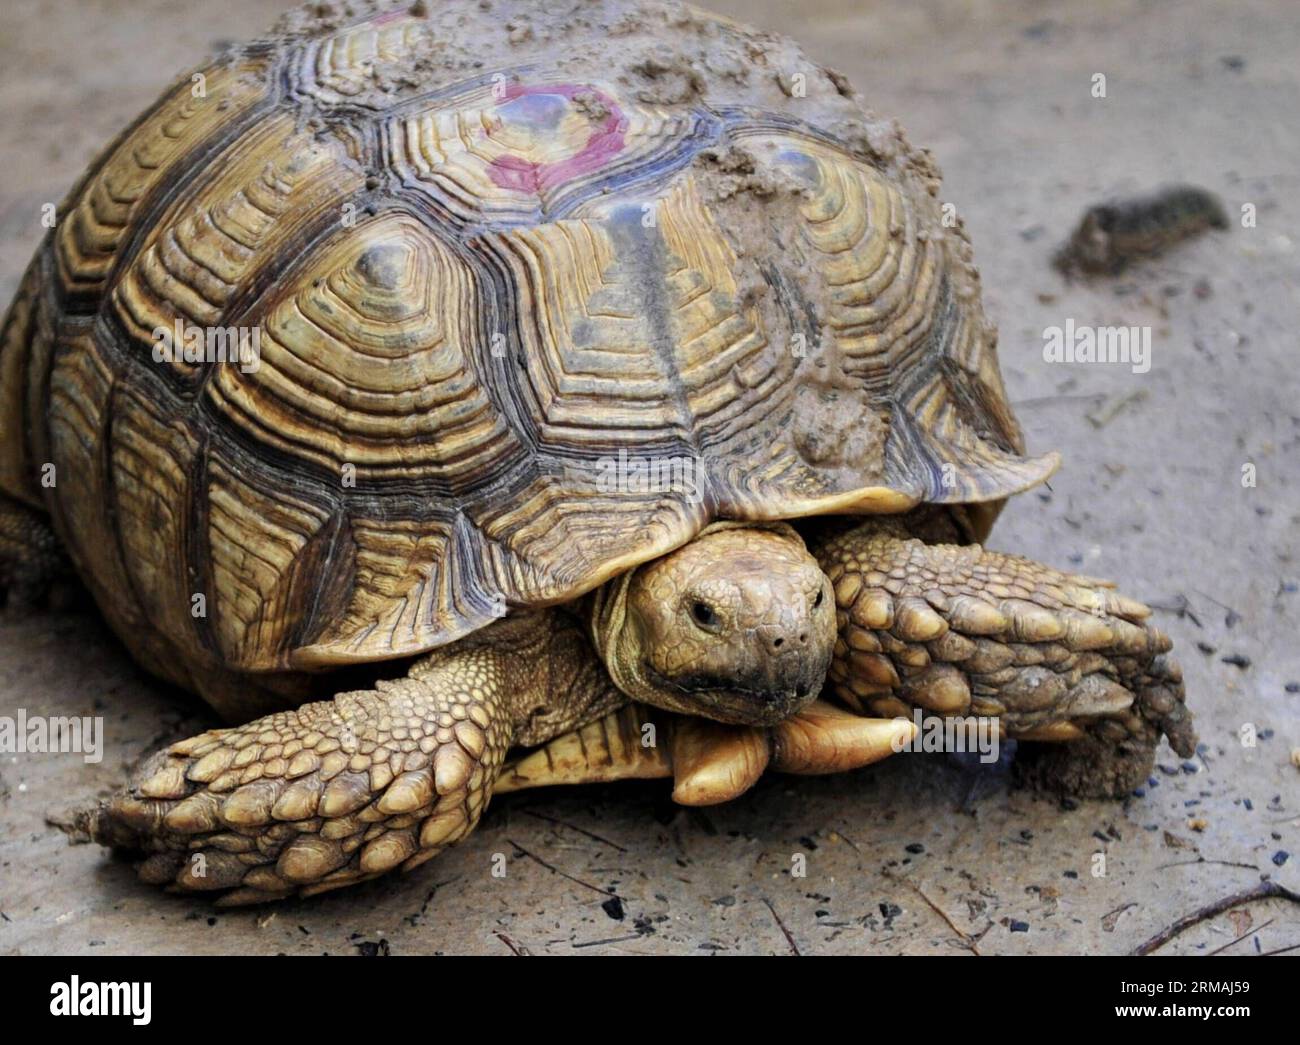 An adult Sulcata tortoise (Centrochelys sulcata) is seen at a cultivation center in Wenchang, south China s Hainan Province, July 11, 2014. A chelonian cultivation center in Wenchang has succeeded in hatching over 1,000 Sulcata tortoises. The new hatchlings were given birth to by adults imported from Africa. The sulcata tortoise, which originally lives near the seashores on the southwestern edge of the Sahara desert, is an endangered species on the IUCN Red List. (Xinhua/Jiang Enyu) (lmm) CHINA-HAINAN-SULCATA TORTOISE-ENDANGERED SPECIES-BREEDING (CN) PUBLICATIONxNOTxINxCHN   to Adult sulcata T Stock Photo